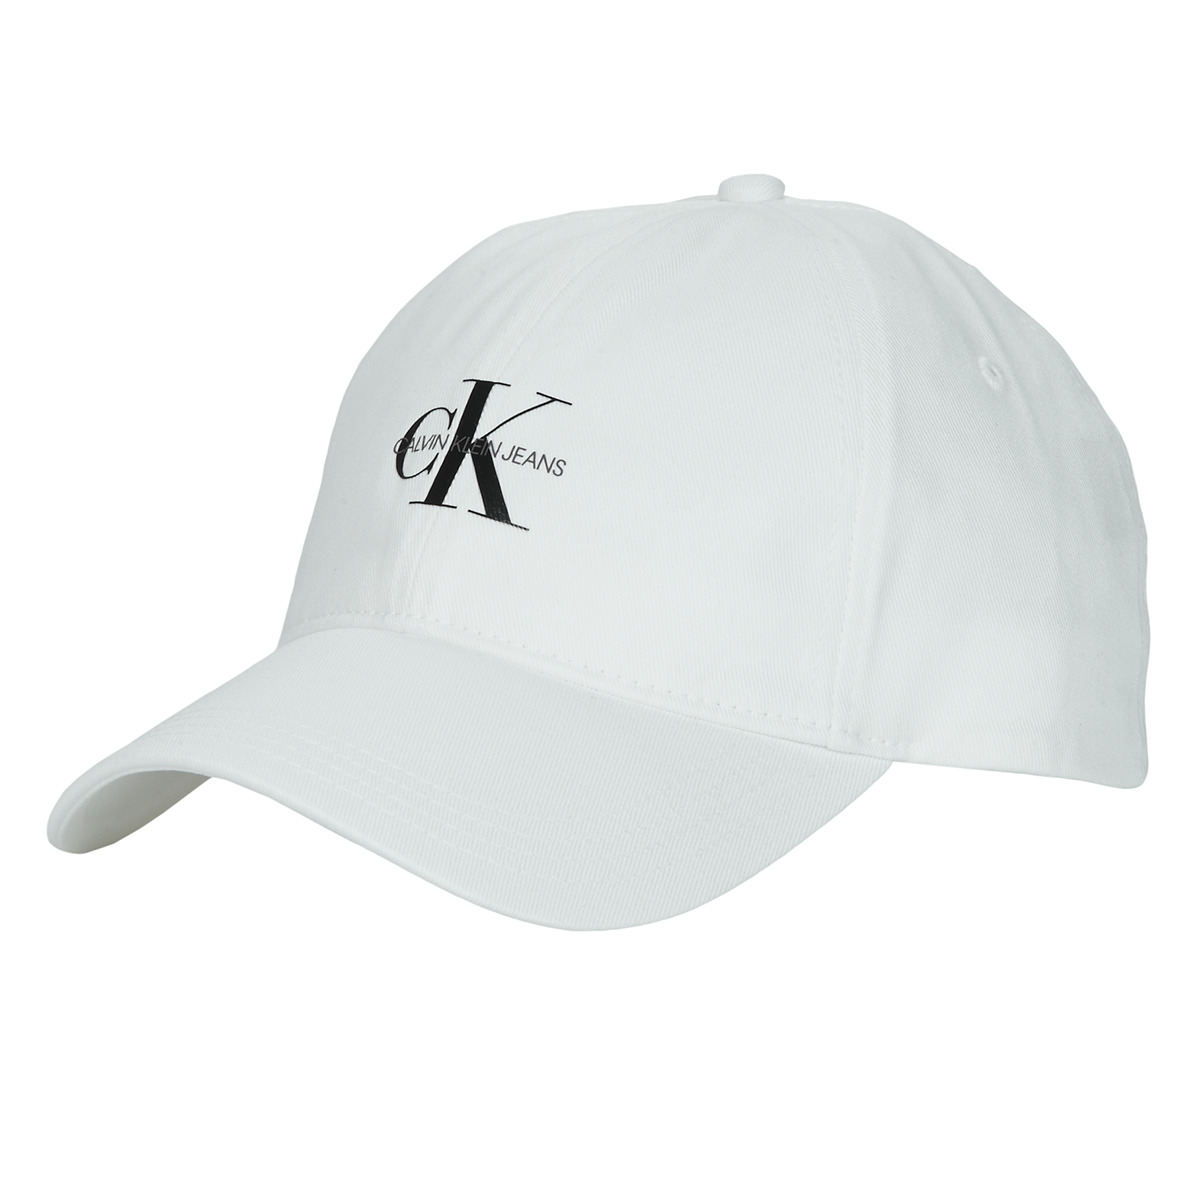 Calvin Klein Jeans CAP Fast | Caps Europe 2990 Accessorie ! € delivery White Spartoo - - 38,00